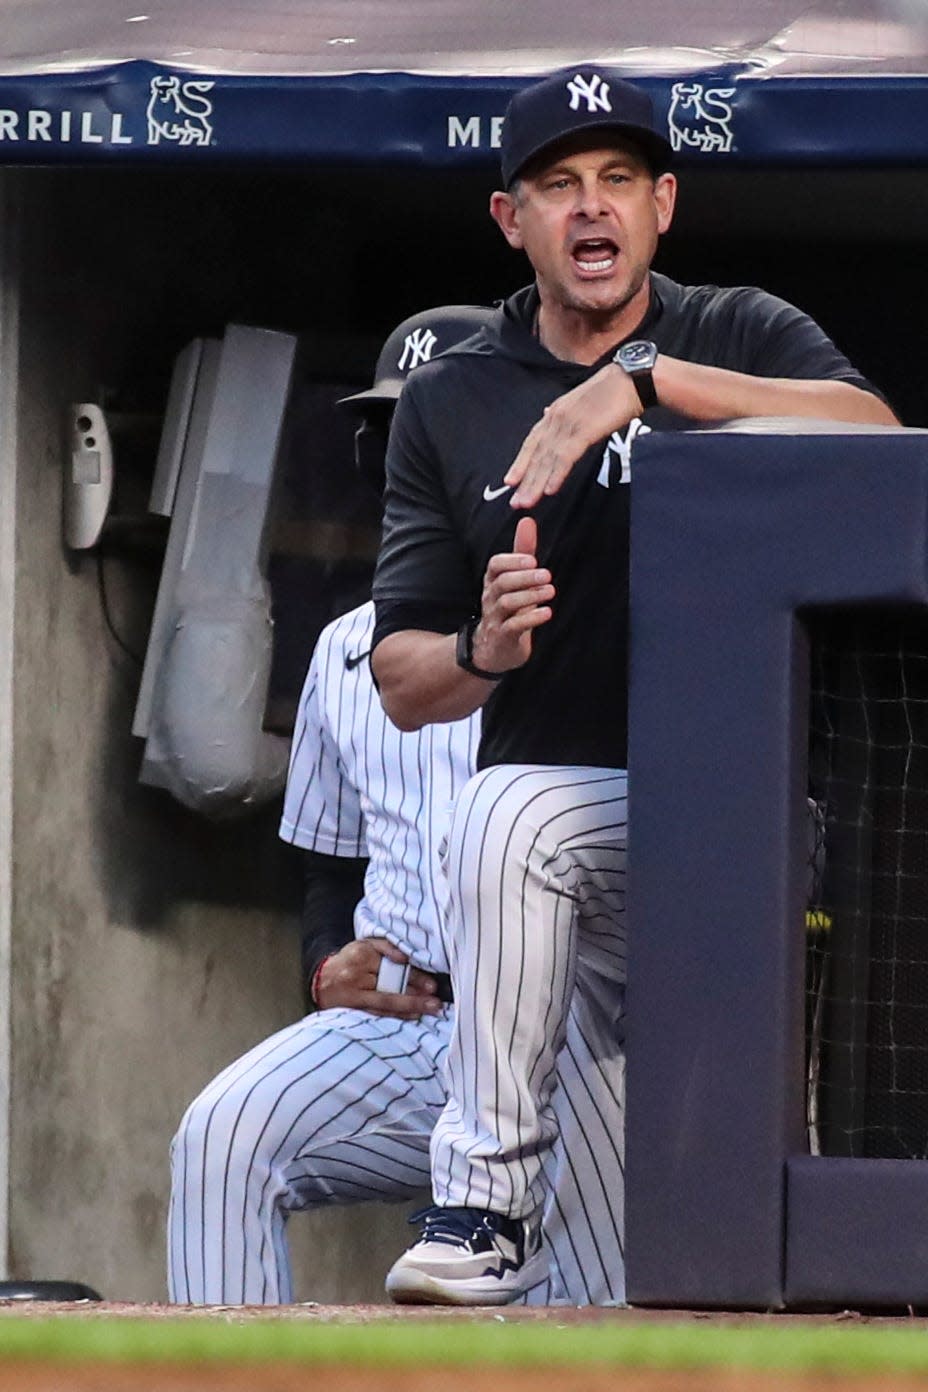 Jun 28, 2022; Bronx, New York, USA; New York Yankees manager Aaron Boone (17) yells at the home plate umpire after a strike is called in the third inning against the Oakland Athletics at Yankee Stadium. Mandatory Credit: Wendell Cruz-USA TODAY Sports